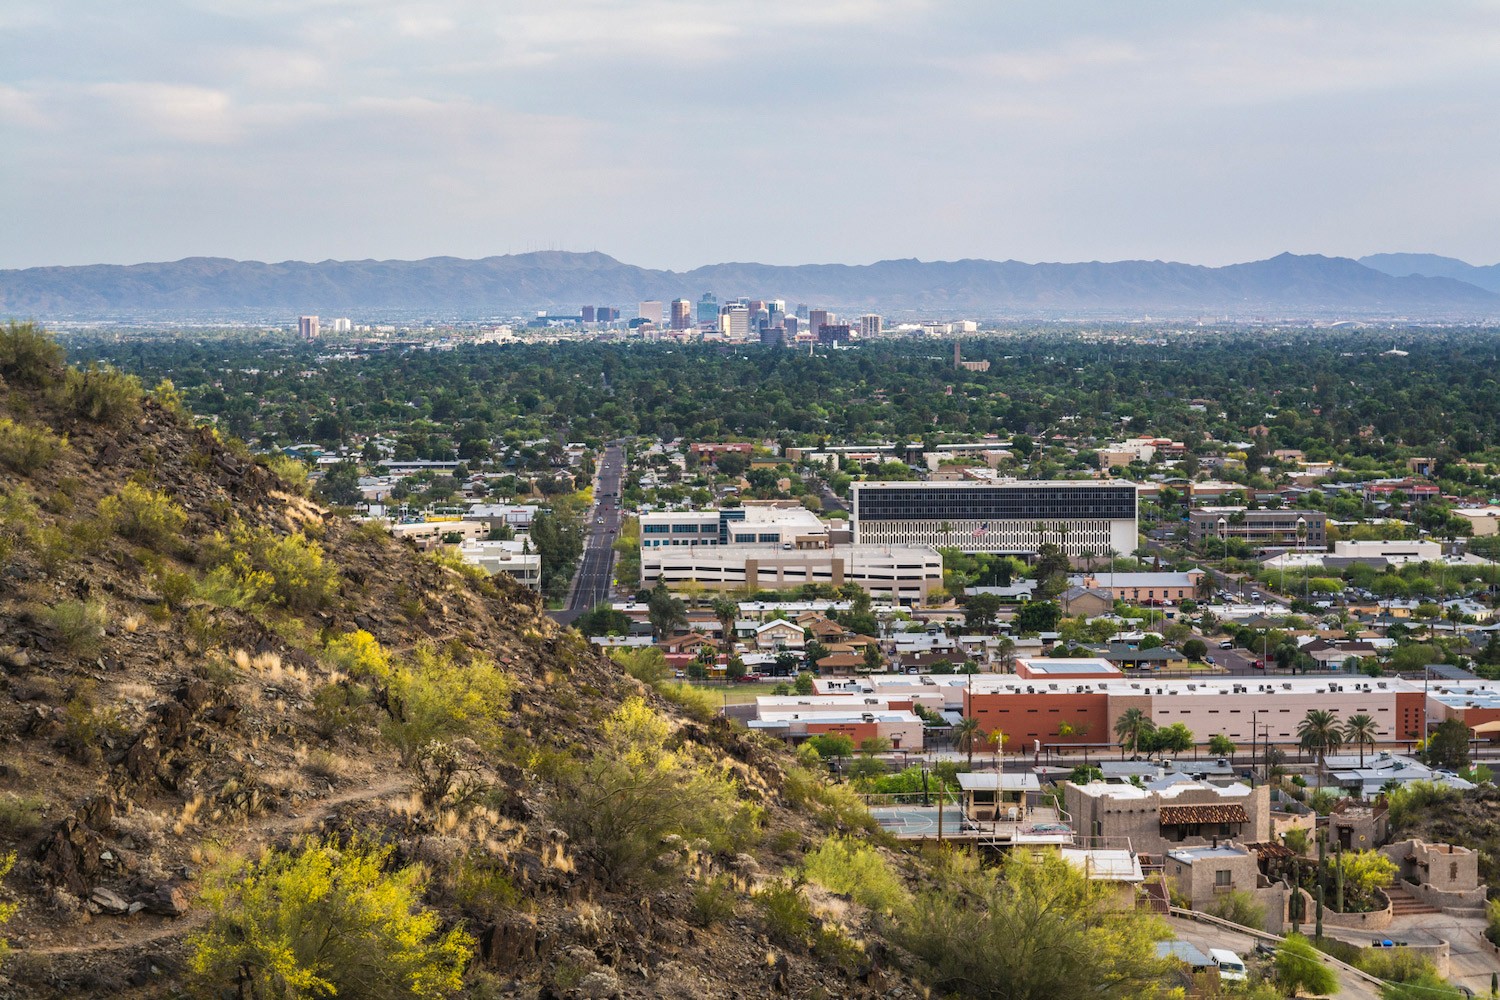 Downtown Phoenix viewed from North Mountain Park